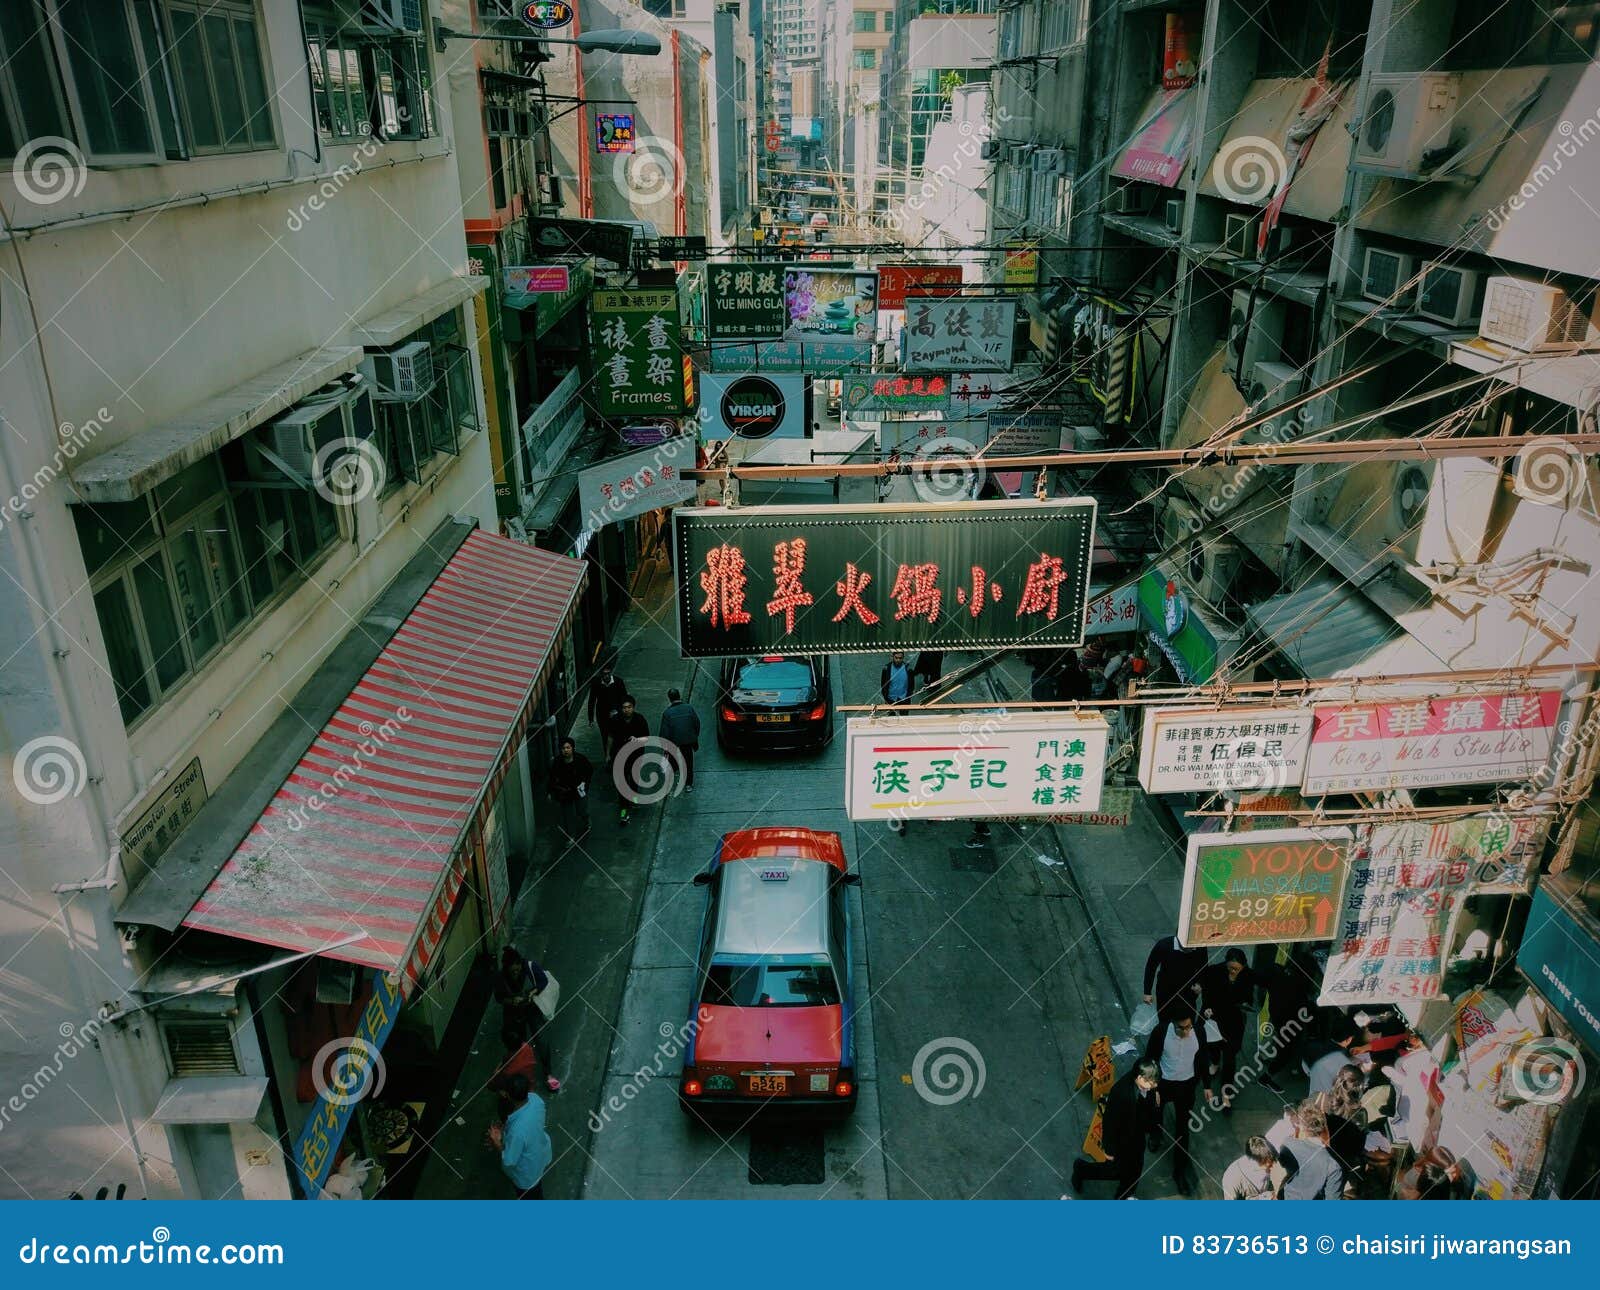 Hong Kong Street Market With Taxi Editorial Photography   Image Of City